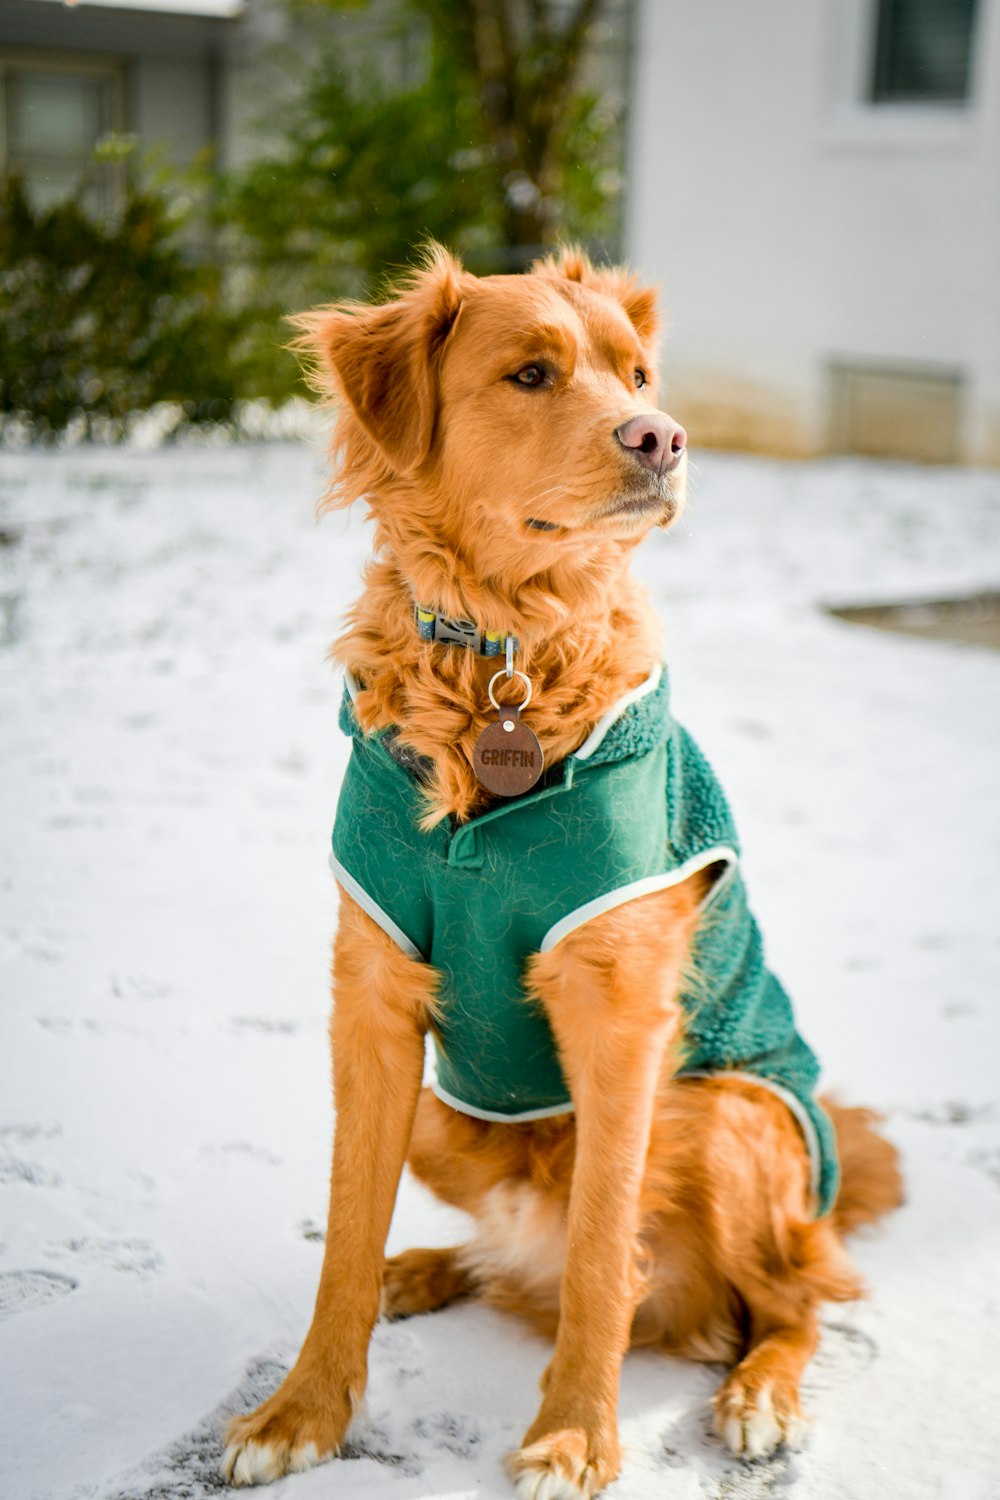 a brown dog wearing a green shirt sitting in the snow